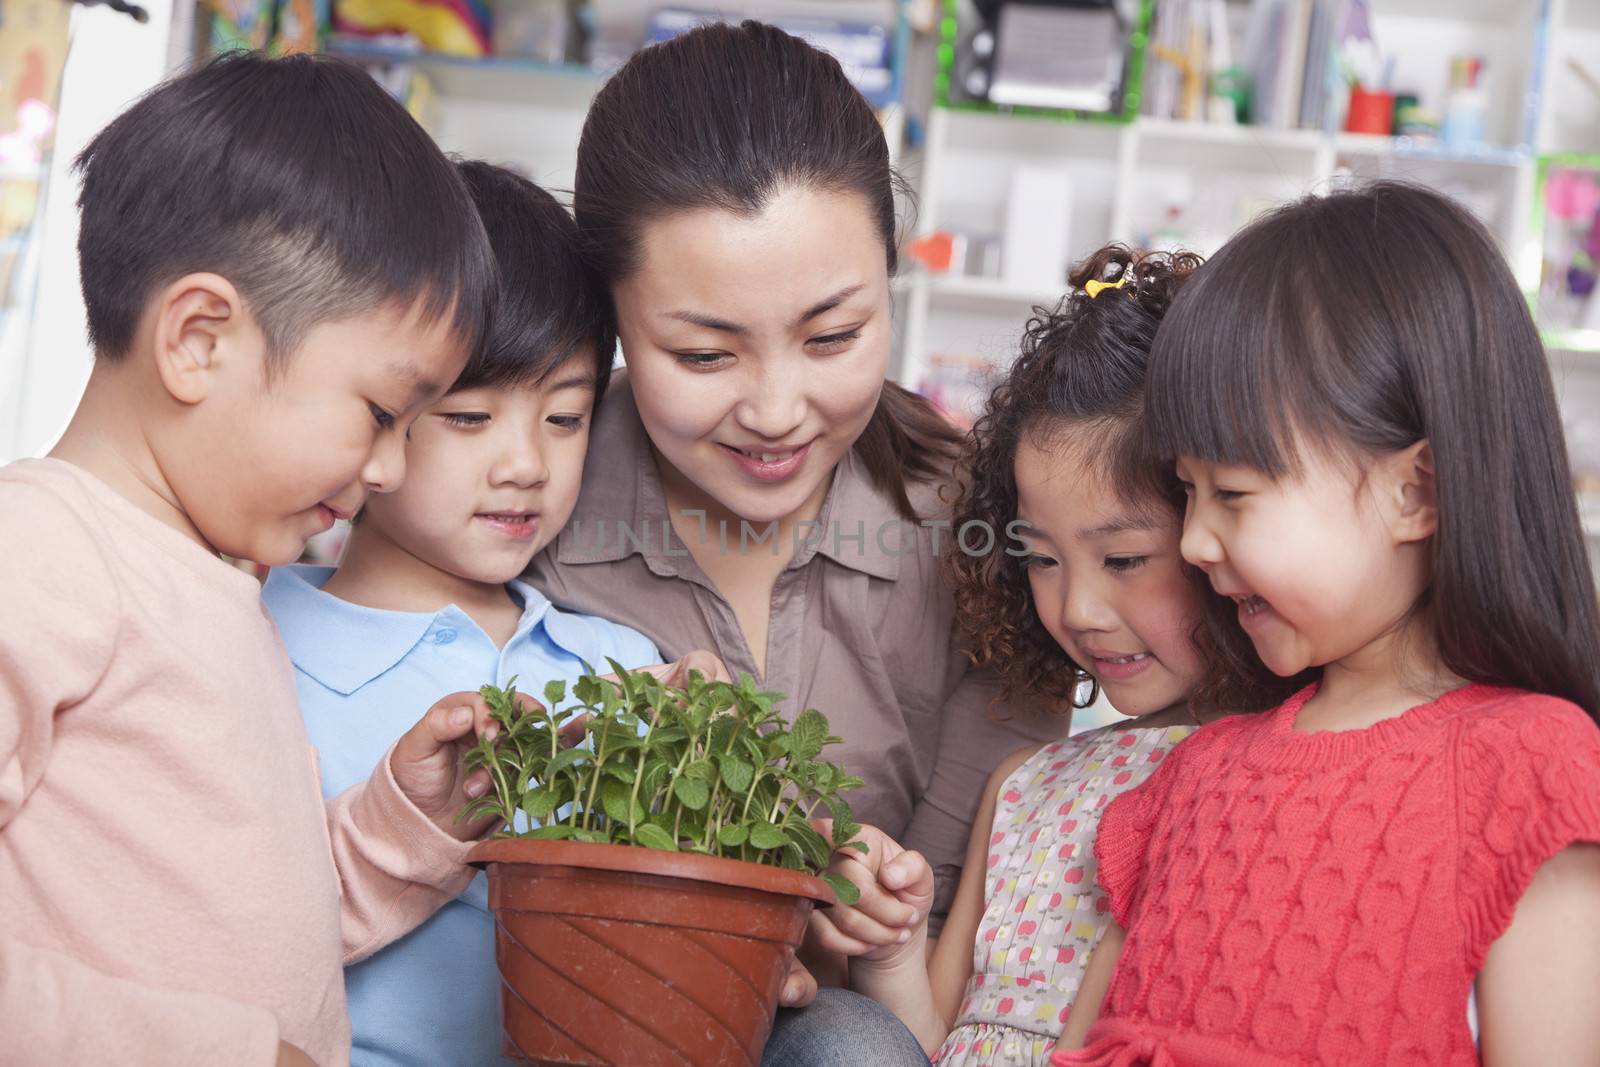 Teacher Showing a Plant to a Group of Students